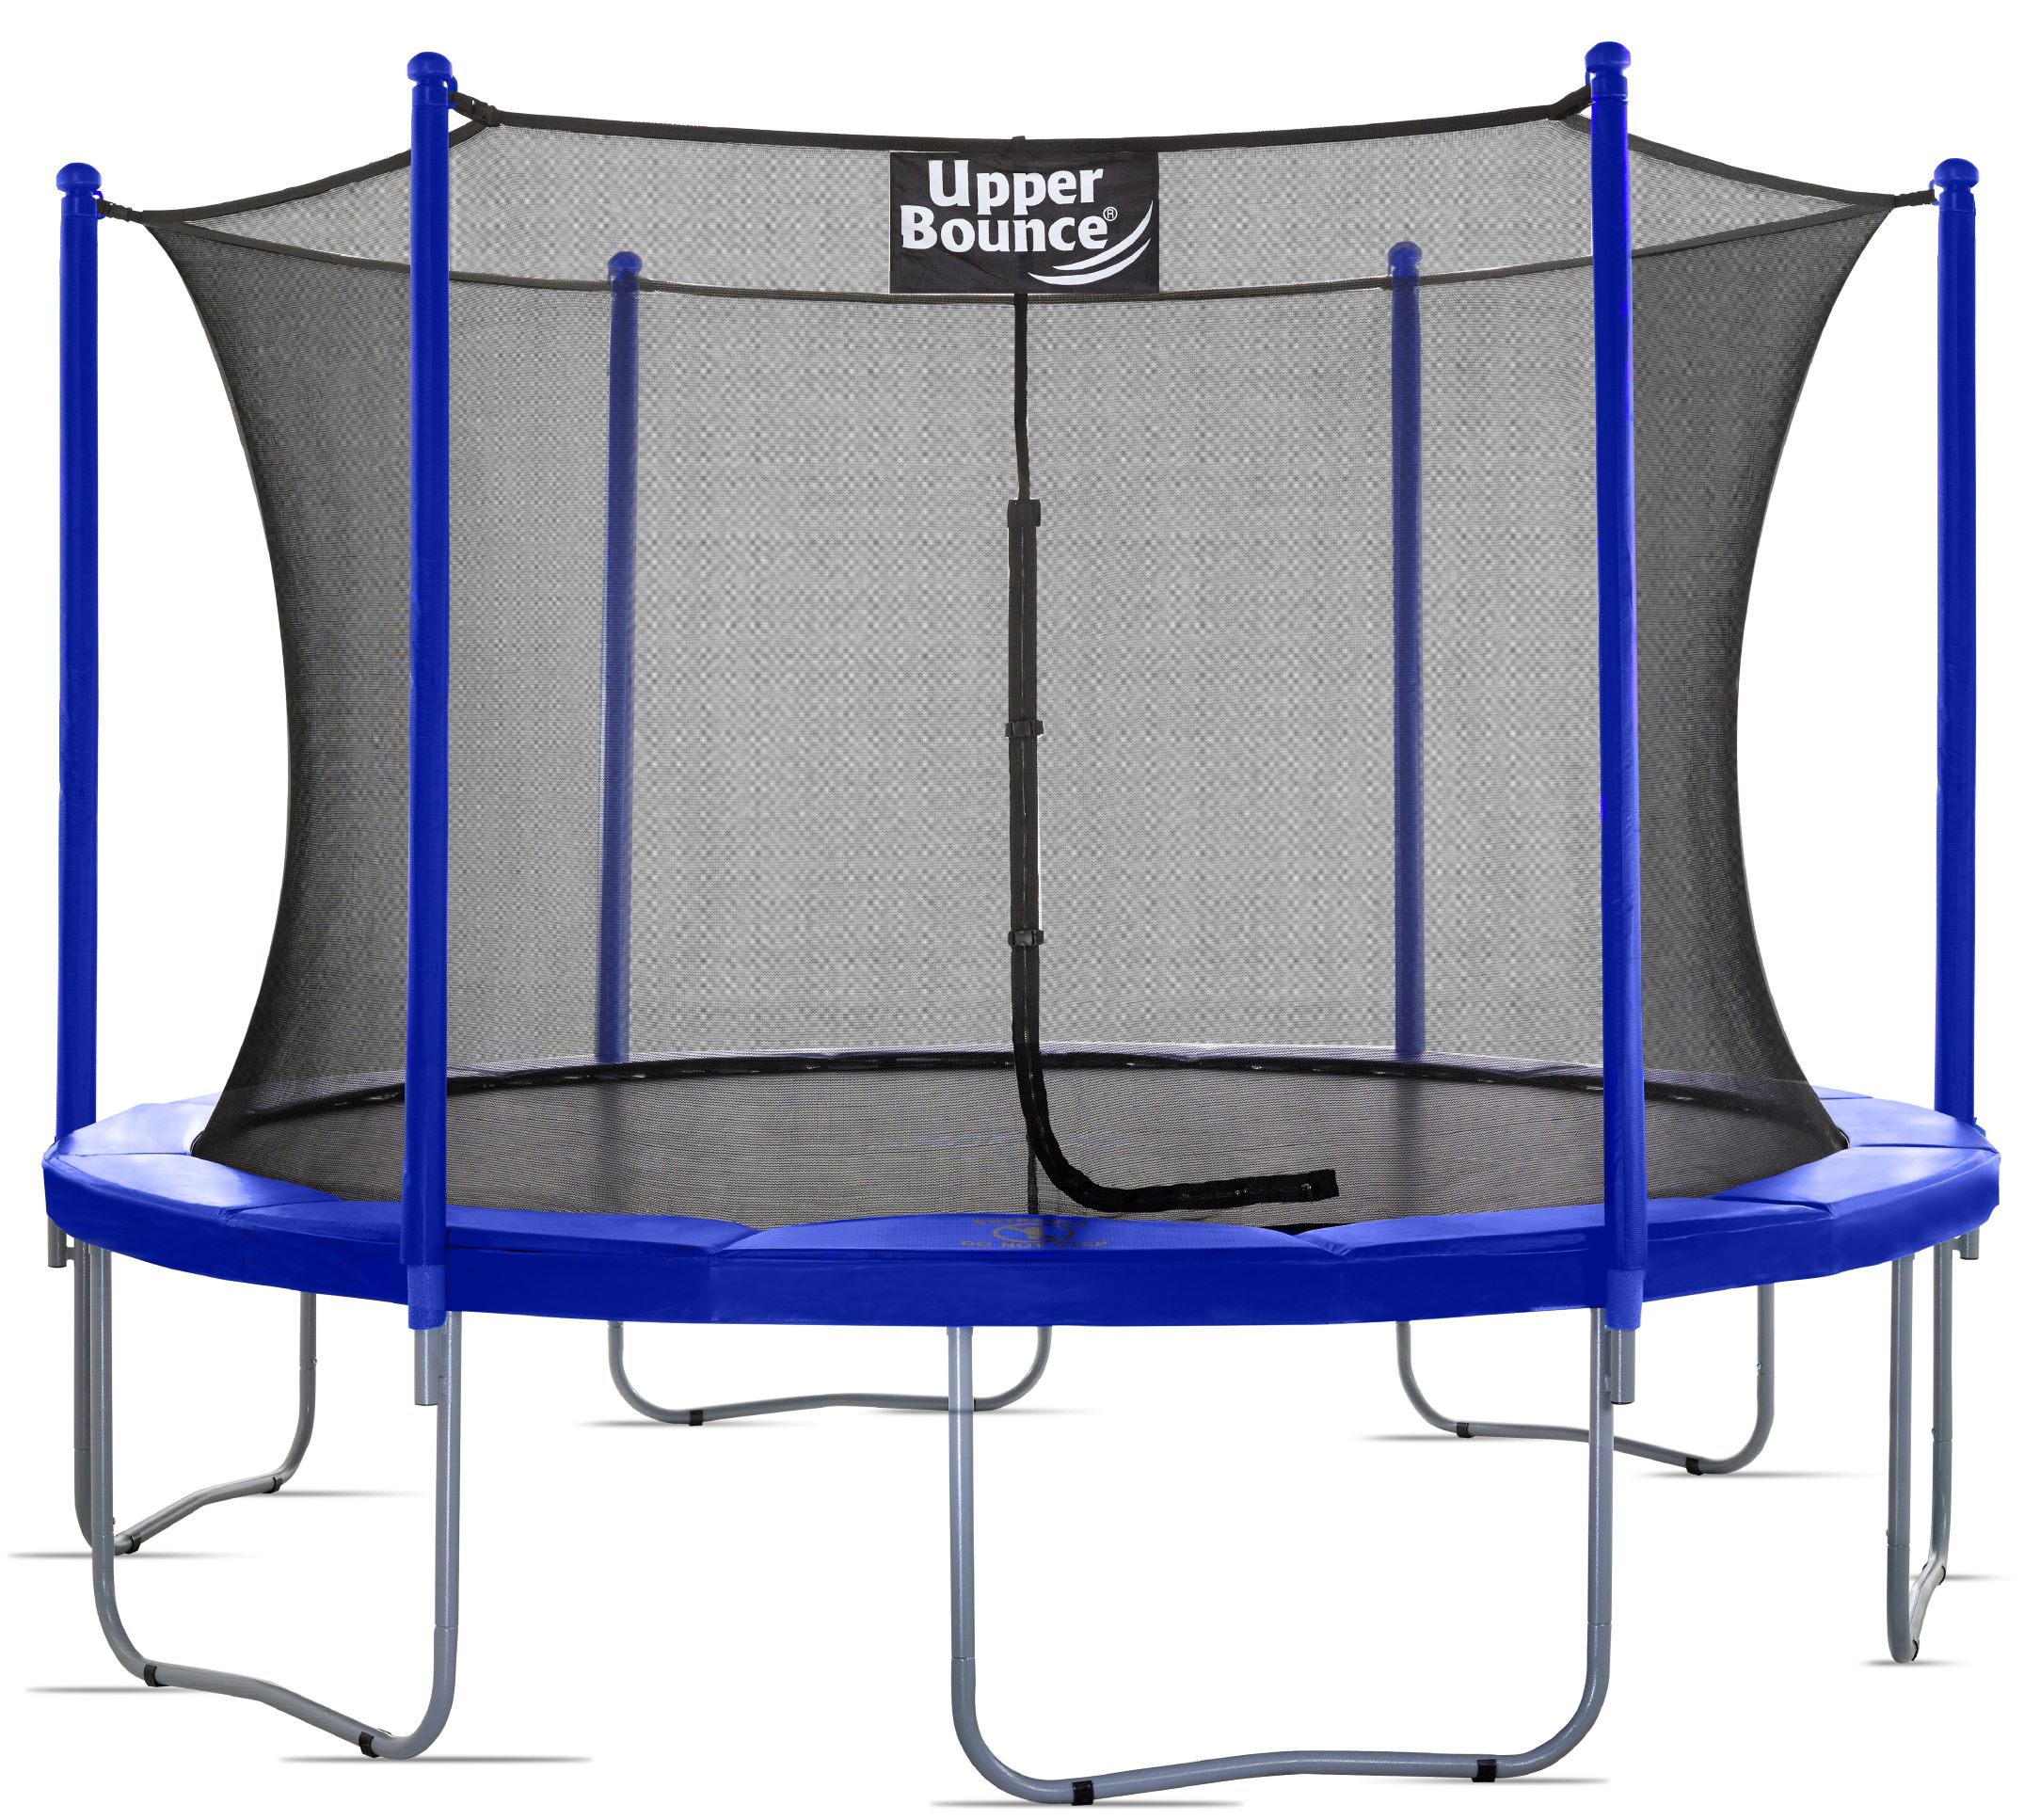 14FT Trampoline With Basketball Hoop&Safety Enclosure Net, 800LBS ...